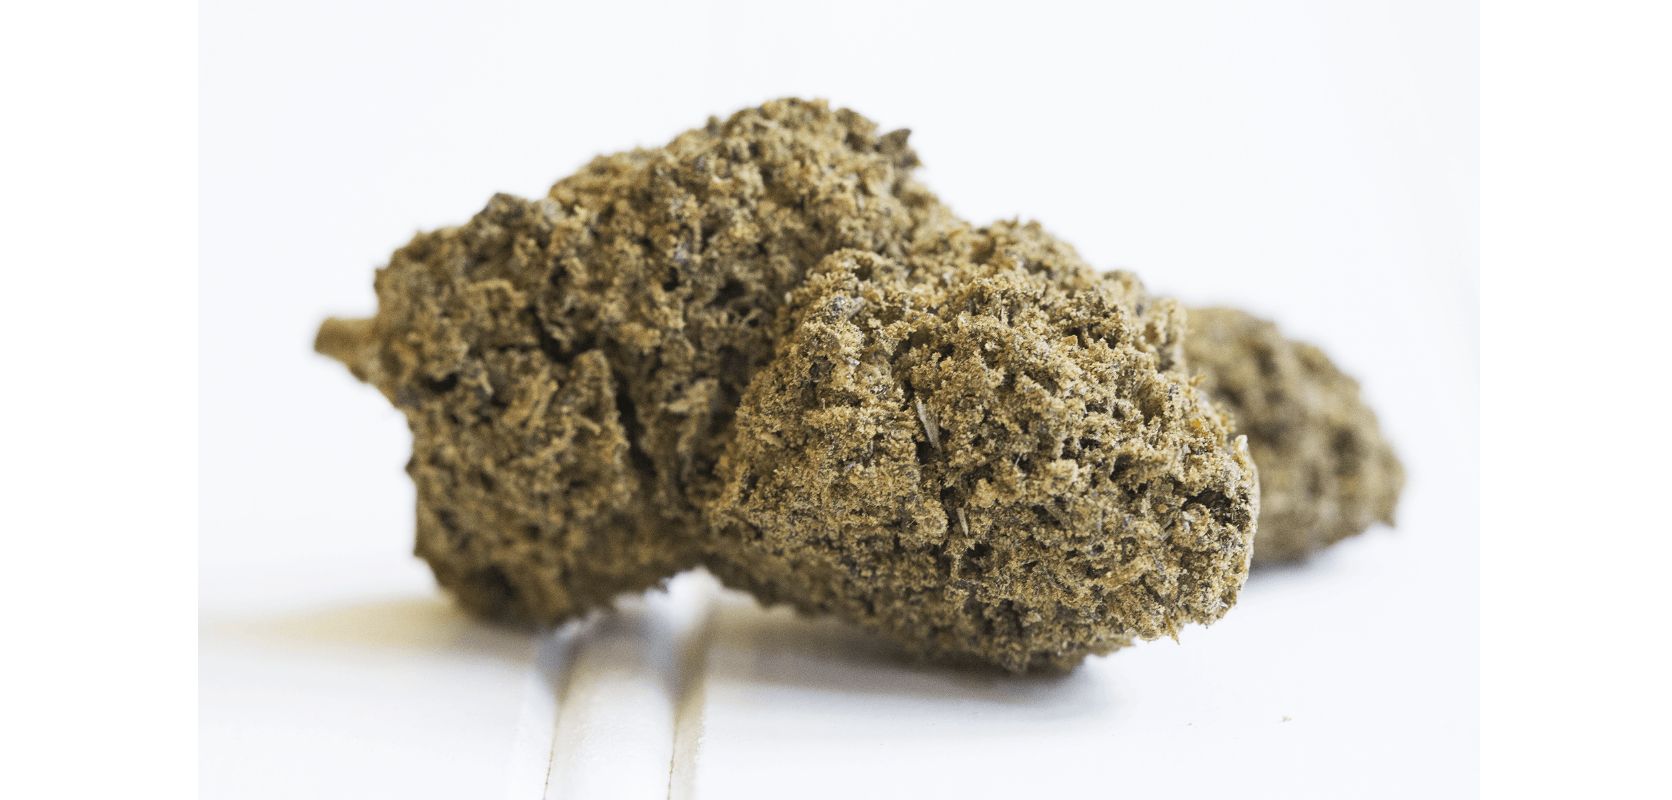 On average, moon rocks THC levels can reach up to 50 to 60%, making them significantly stronger than traditional dry herbs that typically range from 10 to 25% THC.